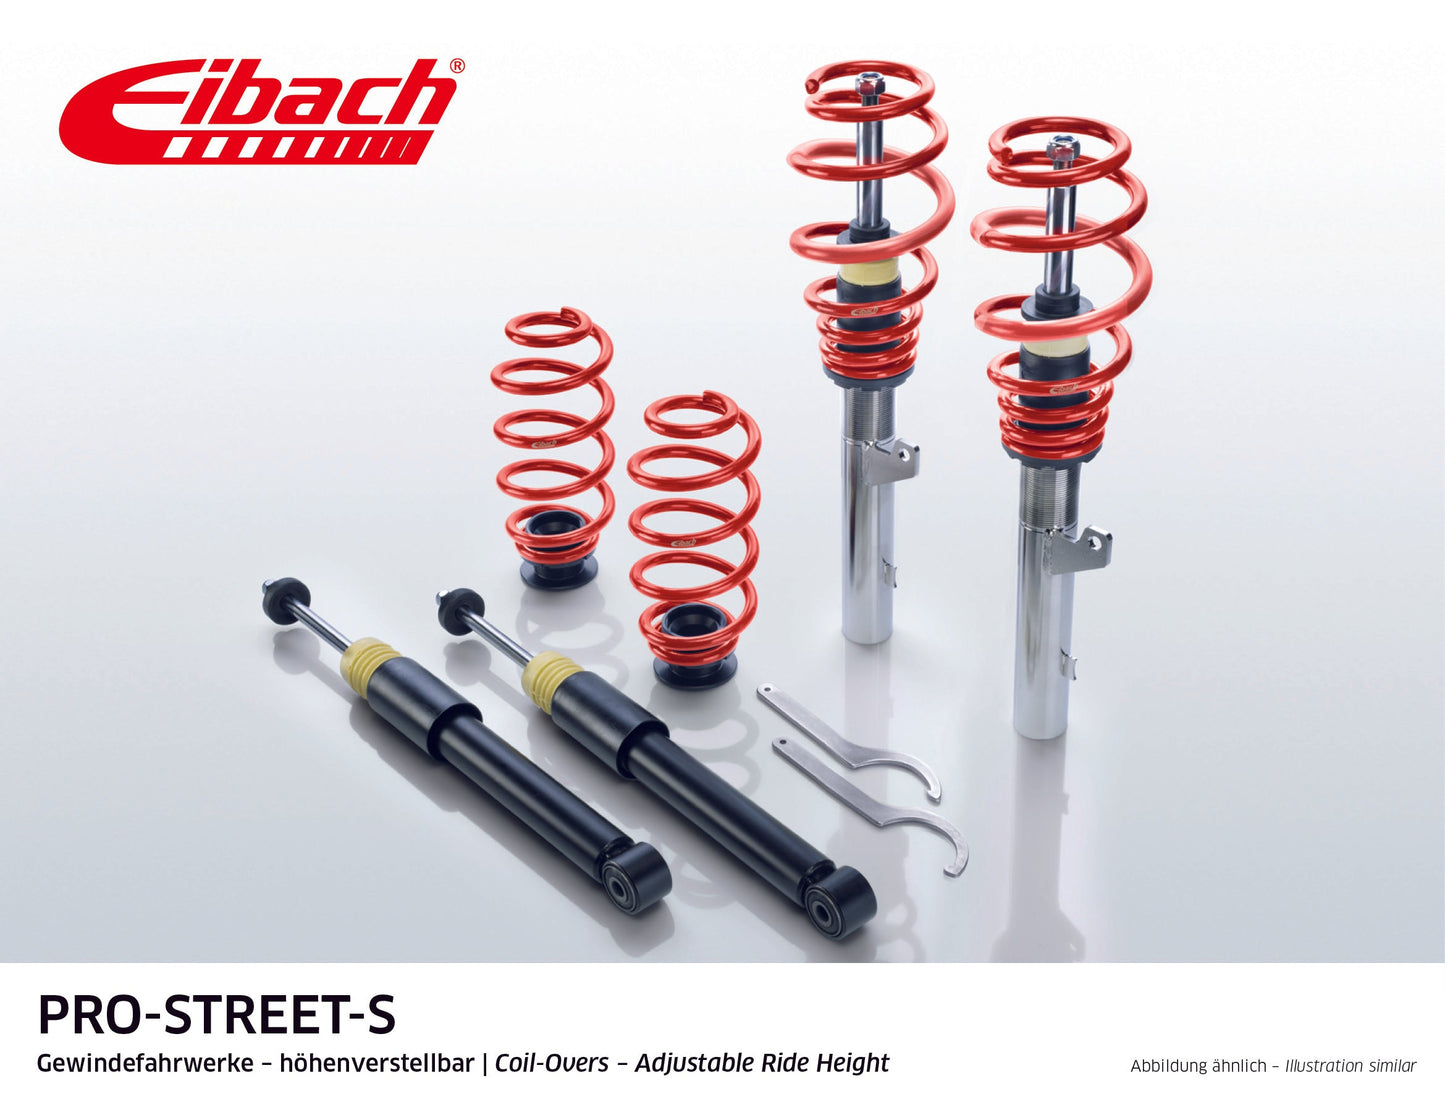 Eibach Pro-Street Coilover (PSS65-10-005-01-22) at £1281.29